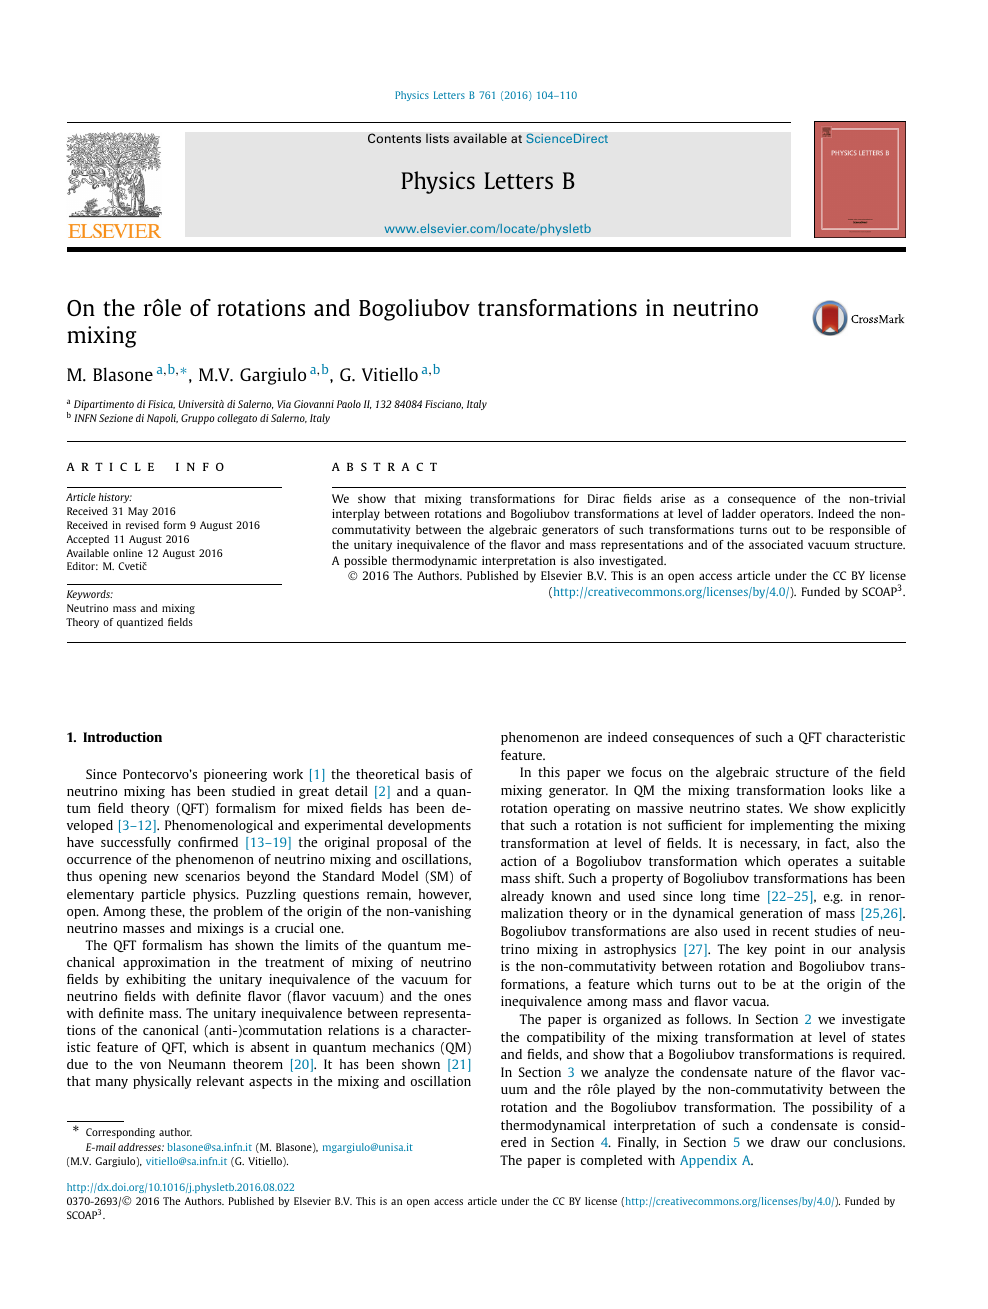 On The Role Of Rotations And Bogoliubov Transformations In Neutrino Mixing Topic Of Research Paper In Physical Sciences Download Scholarly Article Pdf And Read For Free On Cyberleninka Open Science Hub